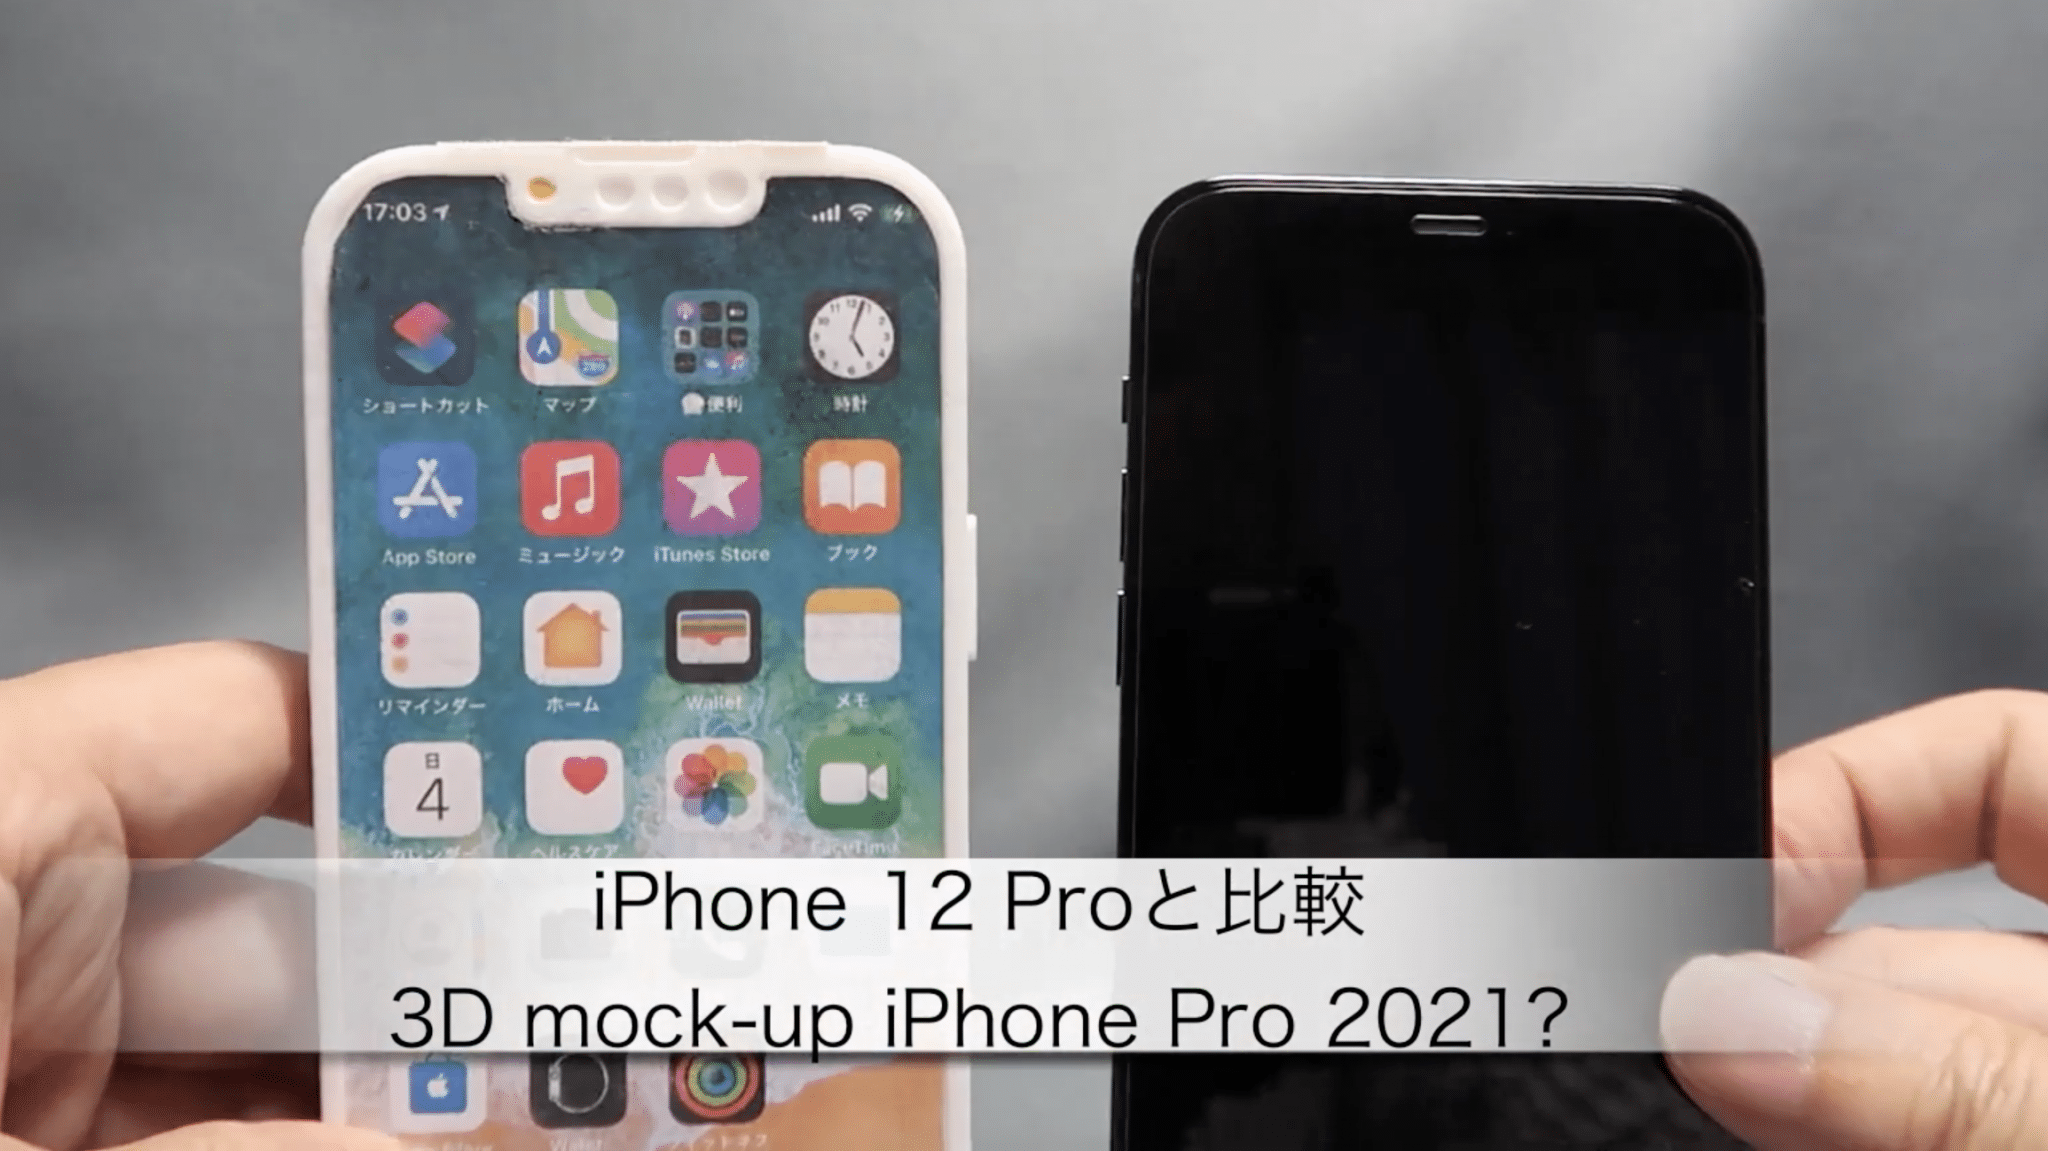 iPhone 13 pro Smaller Notch, Repositioned Earpiece and Front Camera